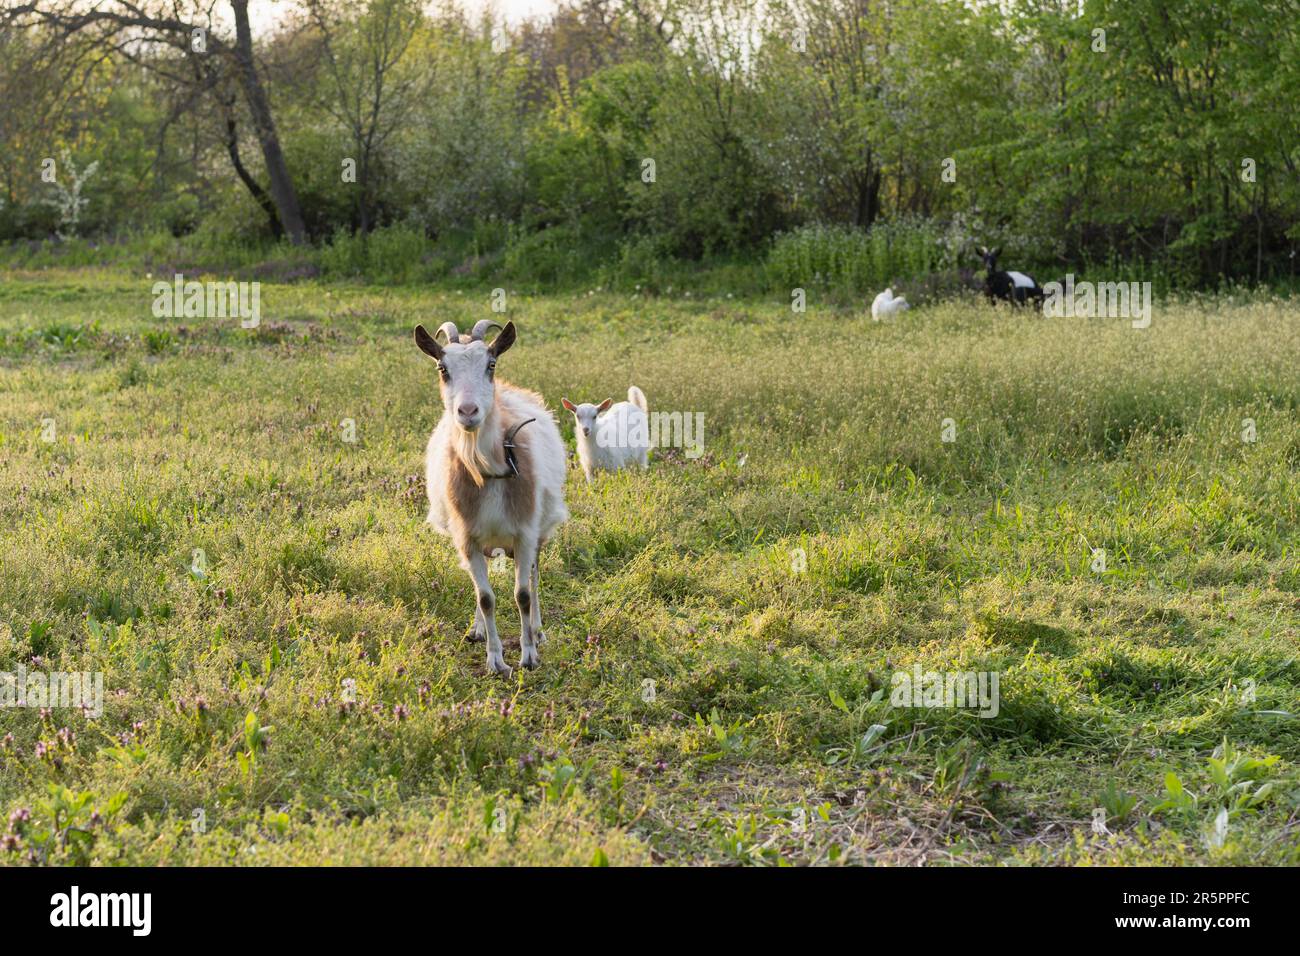 Goats grazing in a grass field, on a farm animal sanctuary. Stock Photo